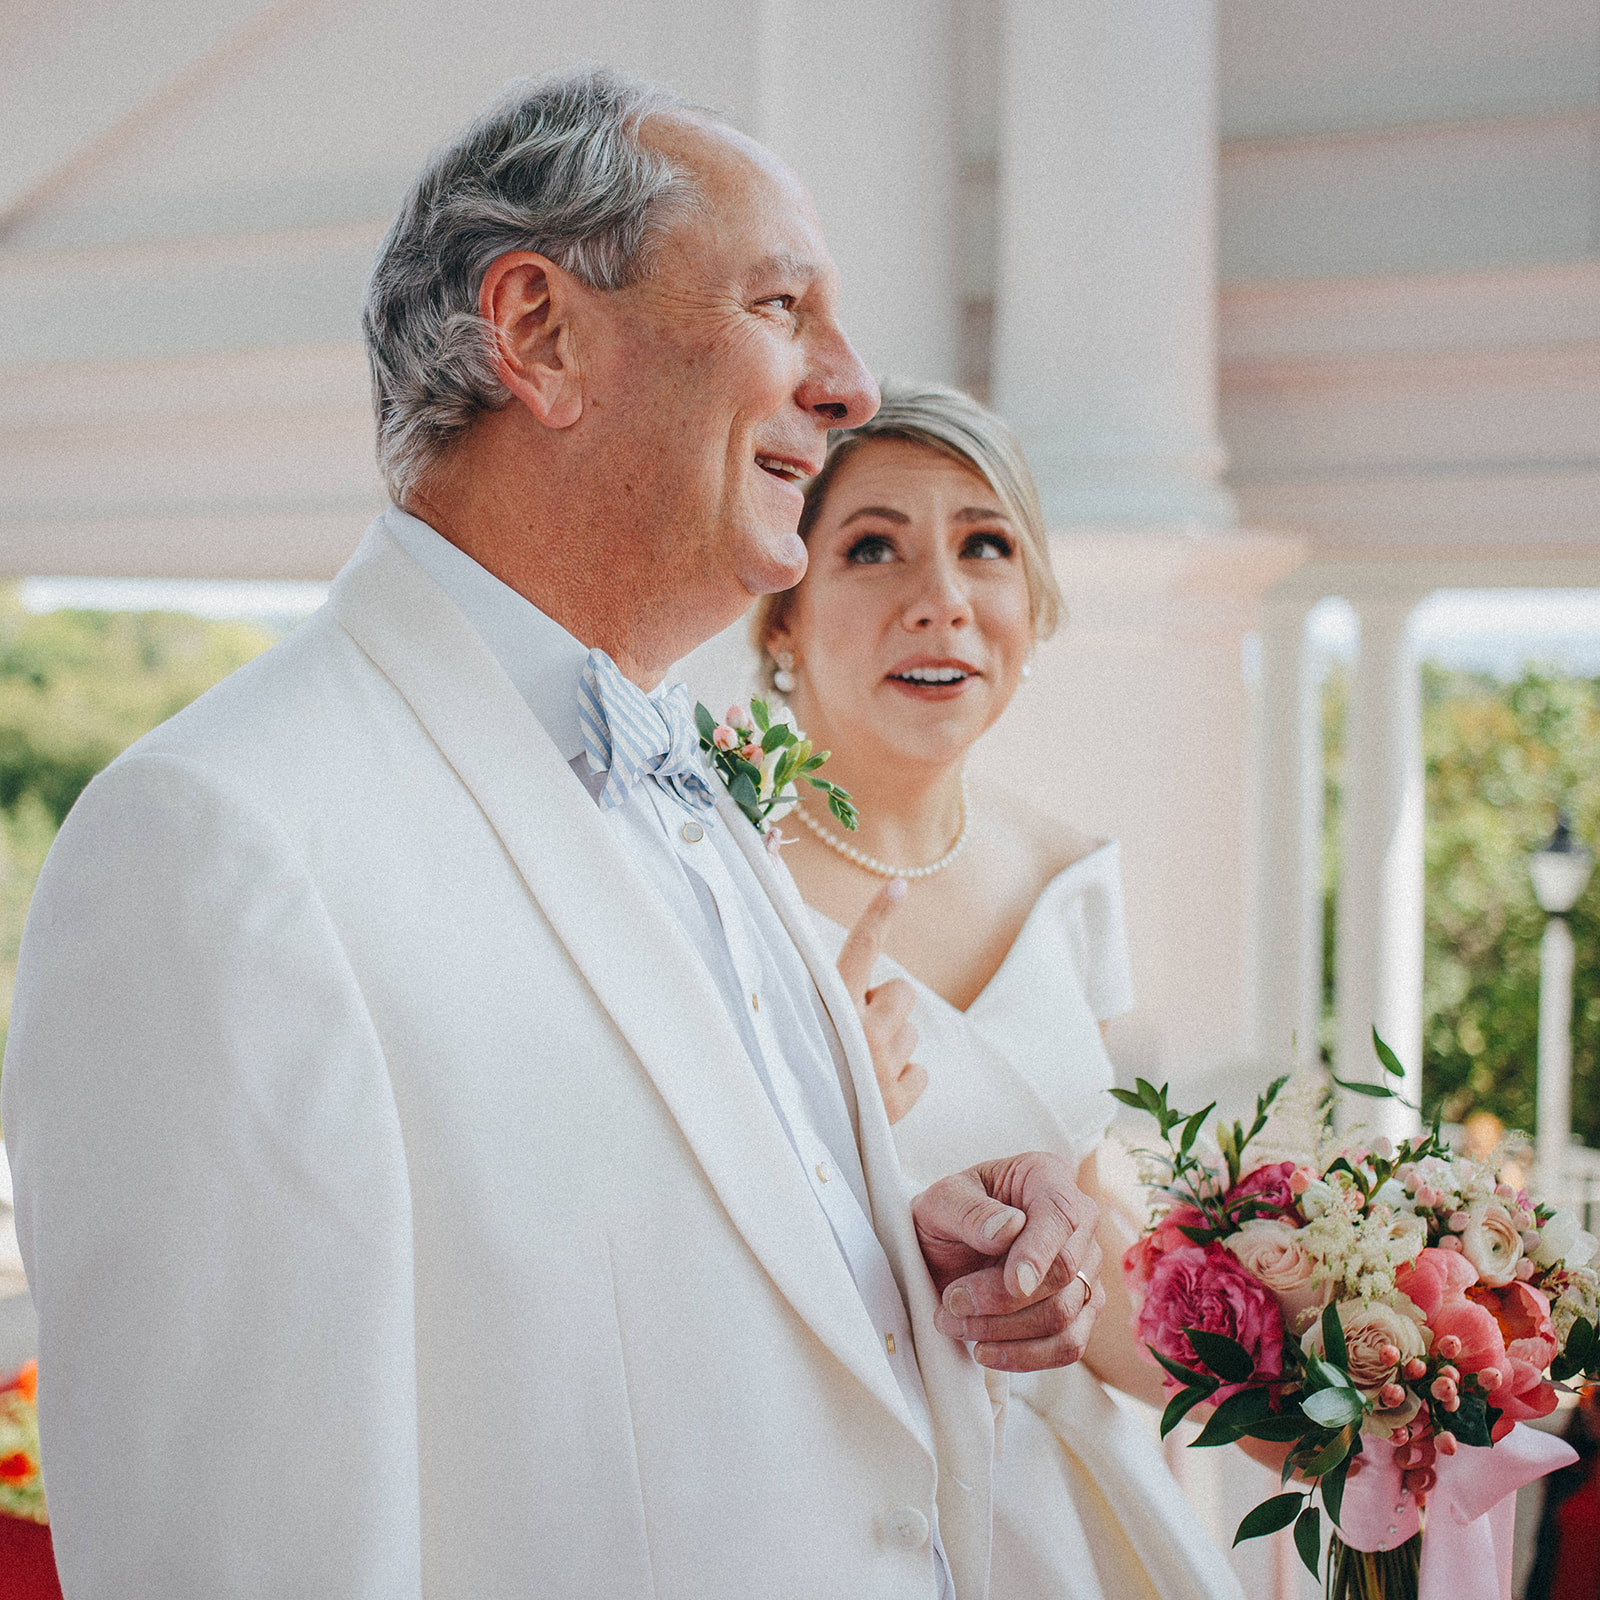 A bride and her dad share a moment before walking down the aisle at the Grand Hotel on Mackinac Island